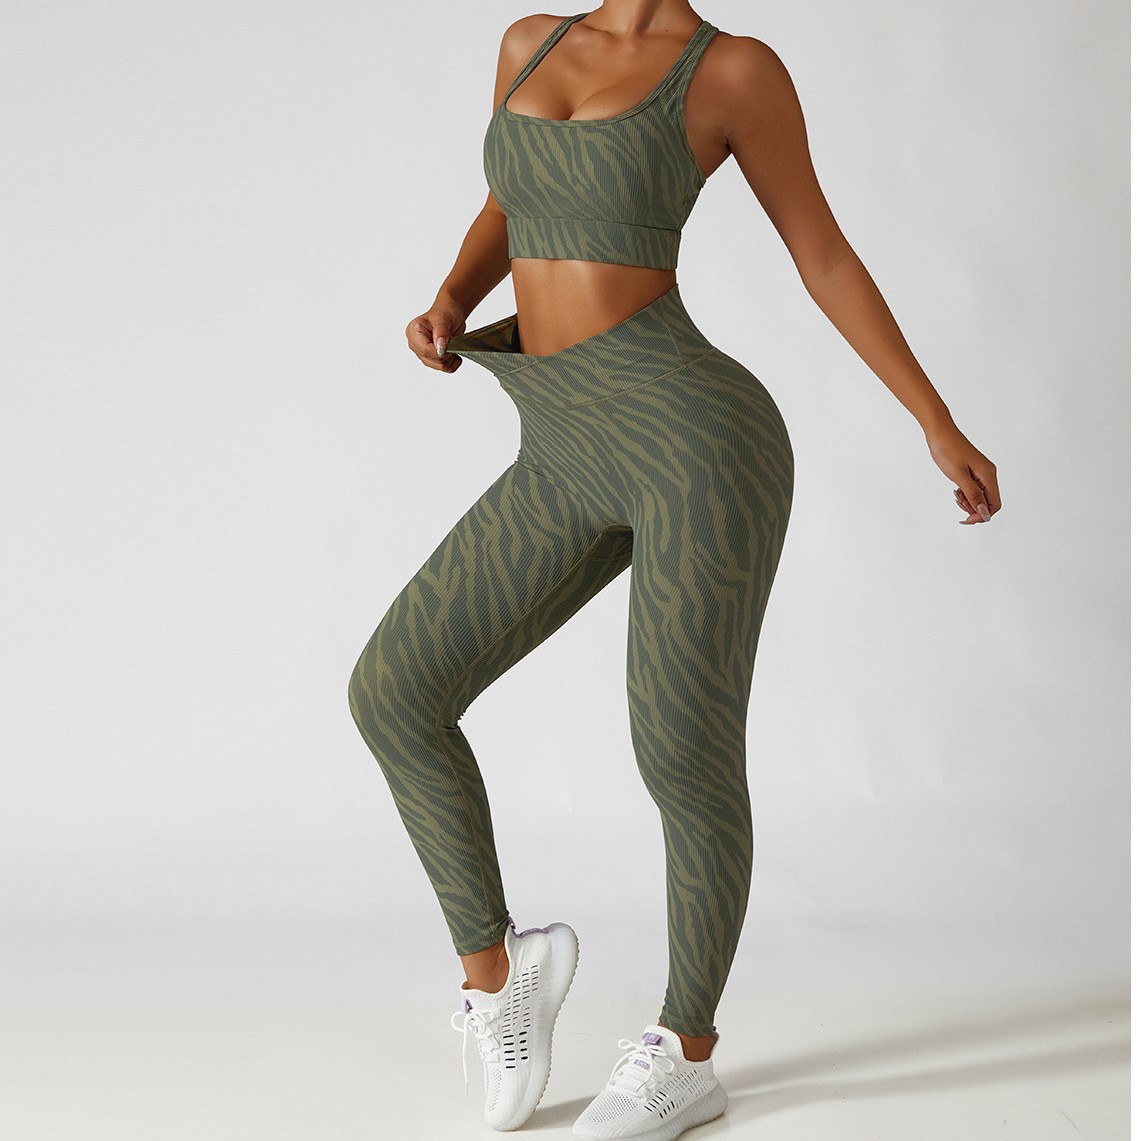 Camouflage Zebra Print Yoga Clothing Suit Sports Bra Gym Pants Workout Fitness Outfits Sportswear Scrunch Butt Active Wear Set